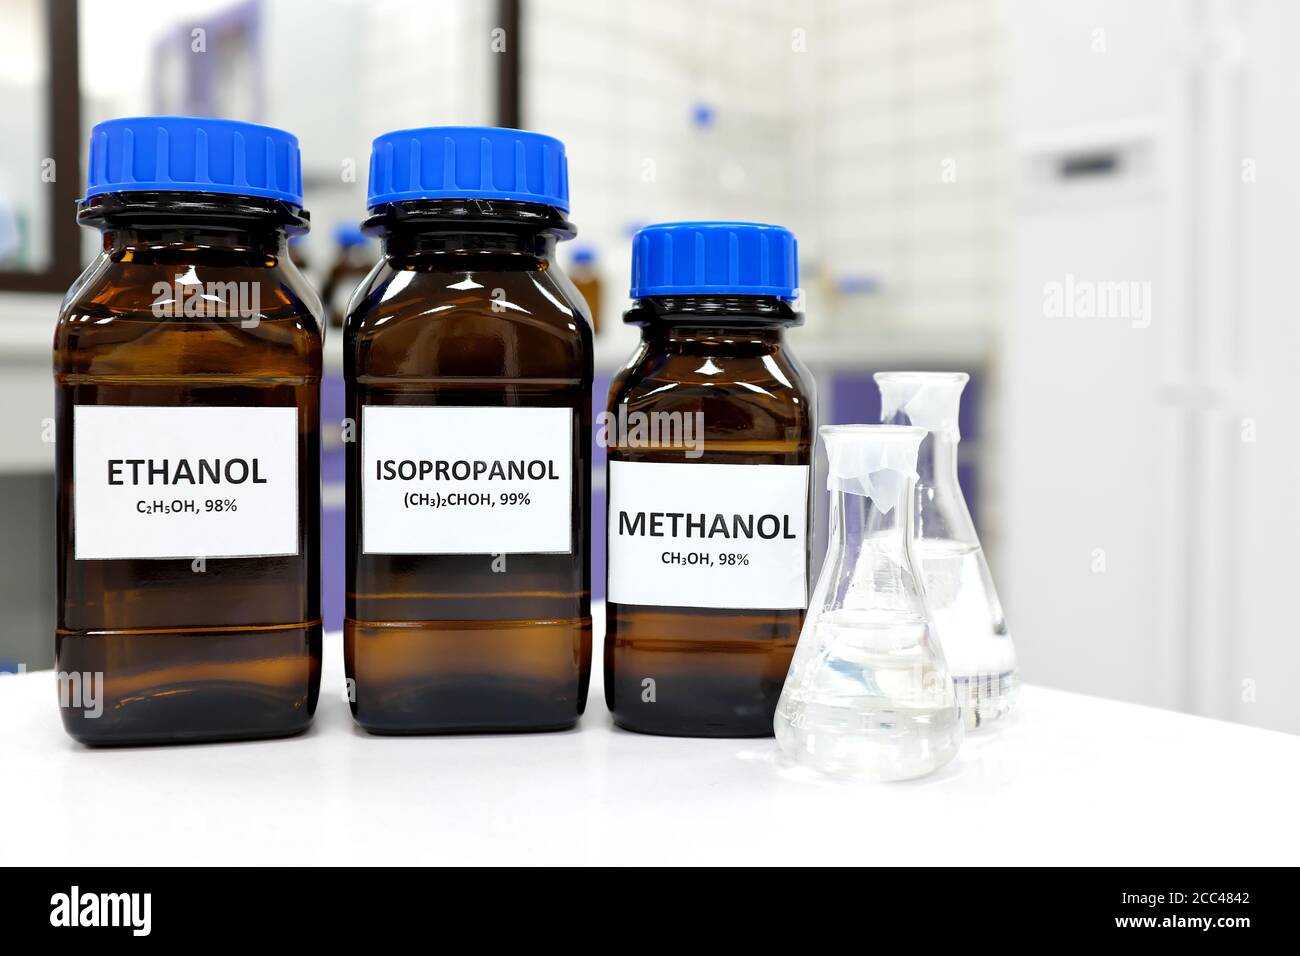 Selective focus of ethanol, methanol and isopropanol brown amber glass bottles inside a laboratory. Different types of alcohol. Stock Photo